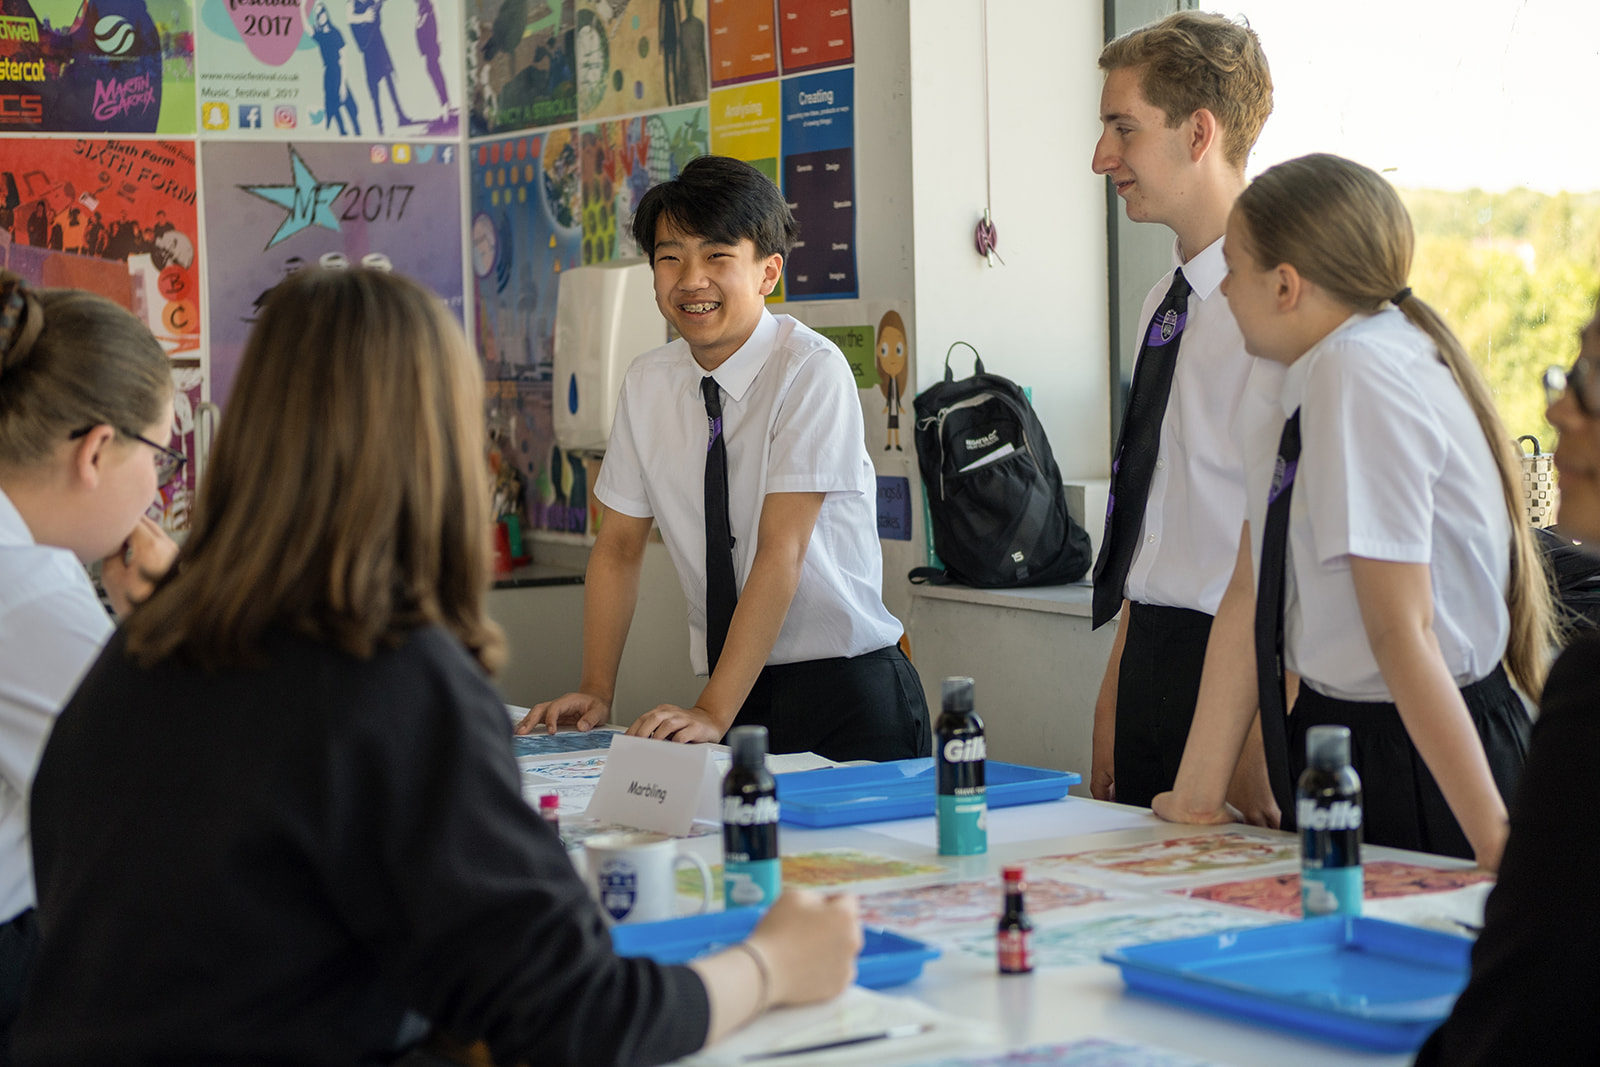 A group of young people in school uniform chat over a table where they are making artwork